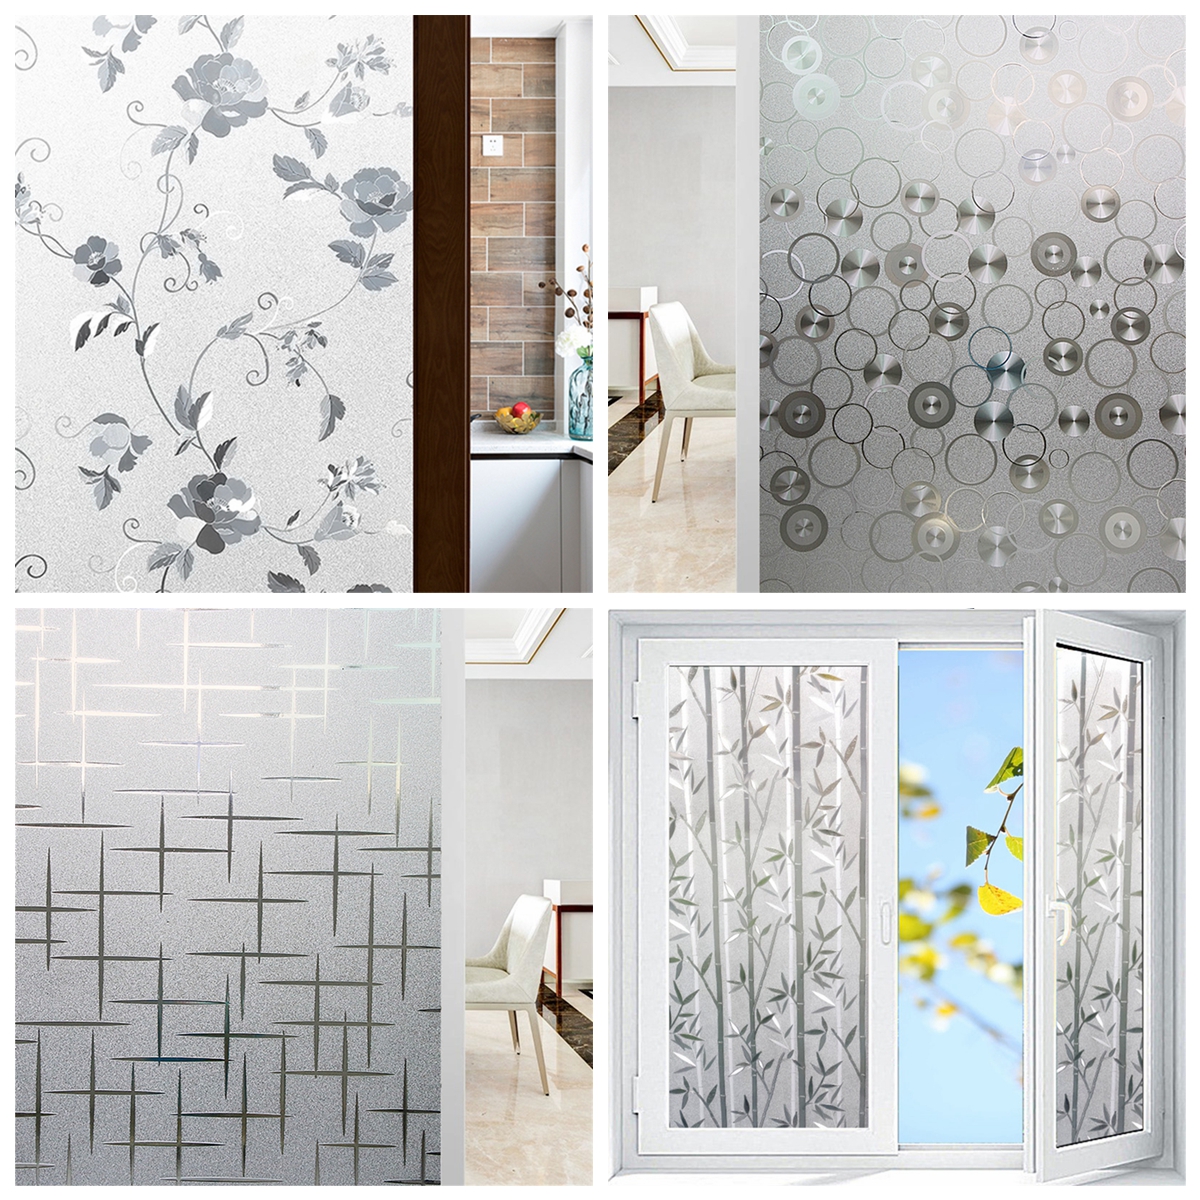 Static-Cling-Glueless-Reusable-Removable-Privacy-Frosted-Decor-Window-Glass-Film-1824221-2